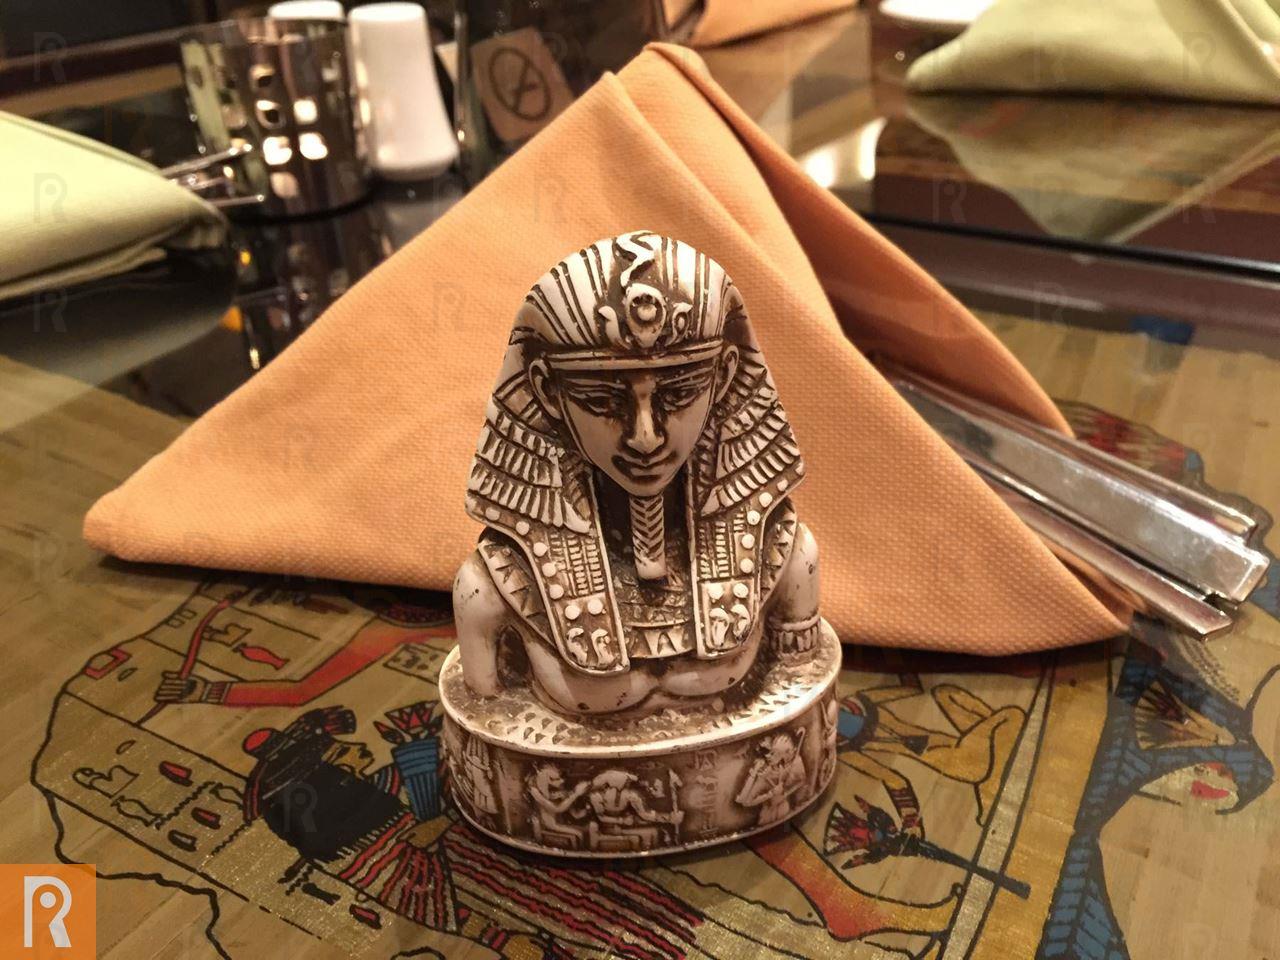 Great Egyptian Night "Flavors of Egypt" at Safir Fintas Kuwait Hotel